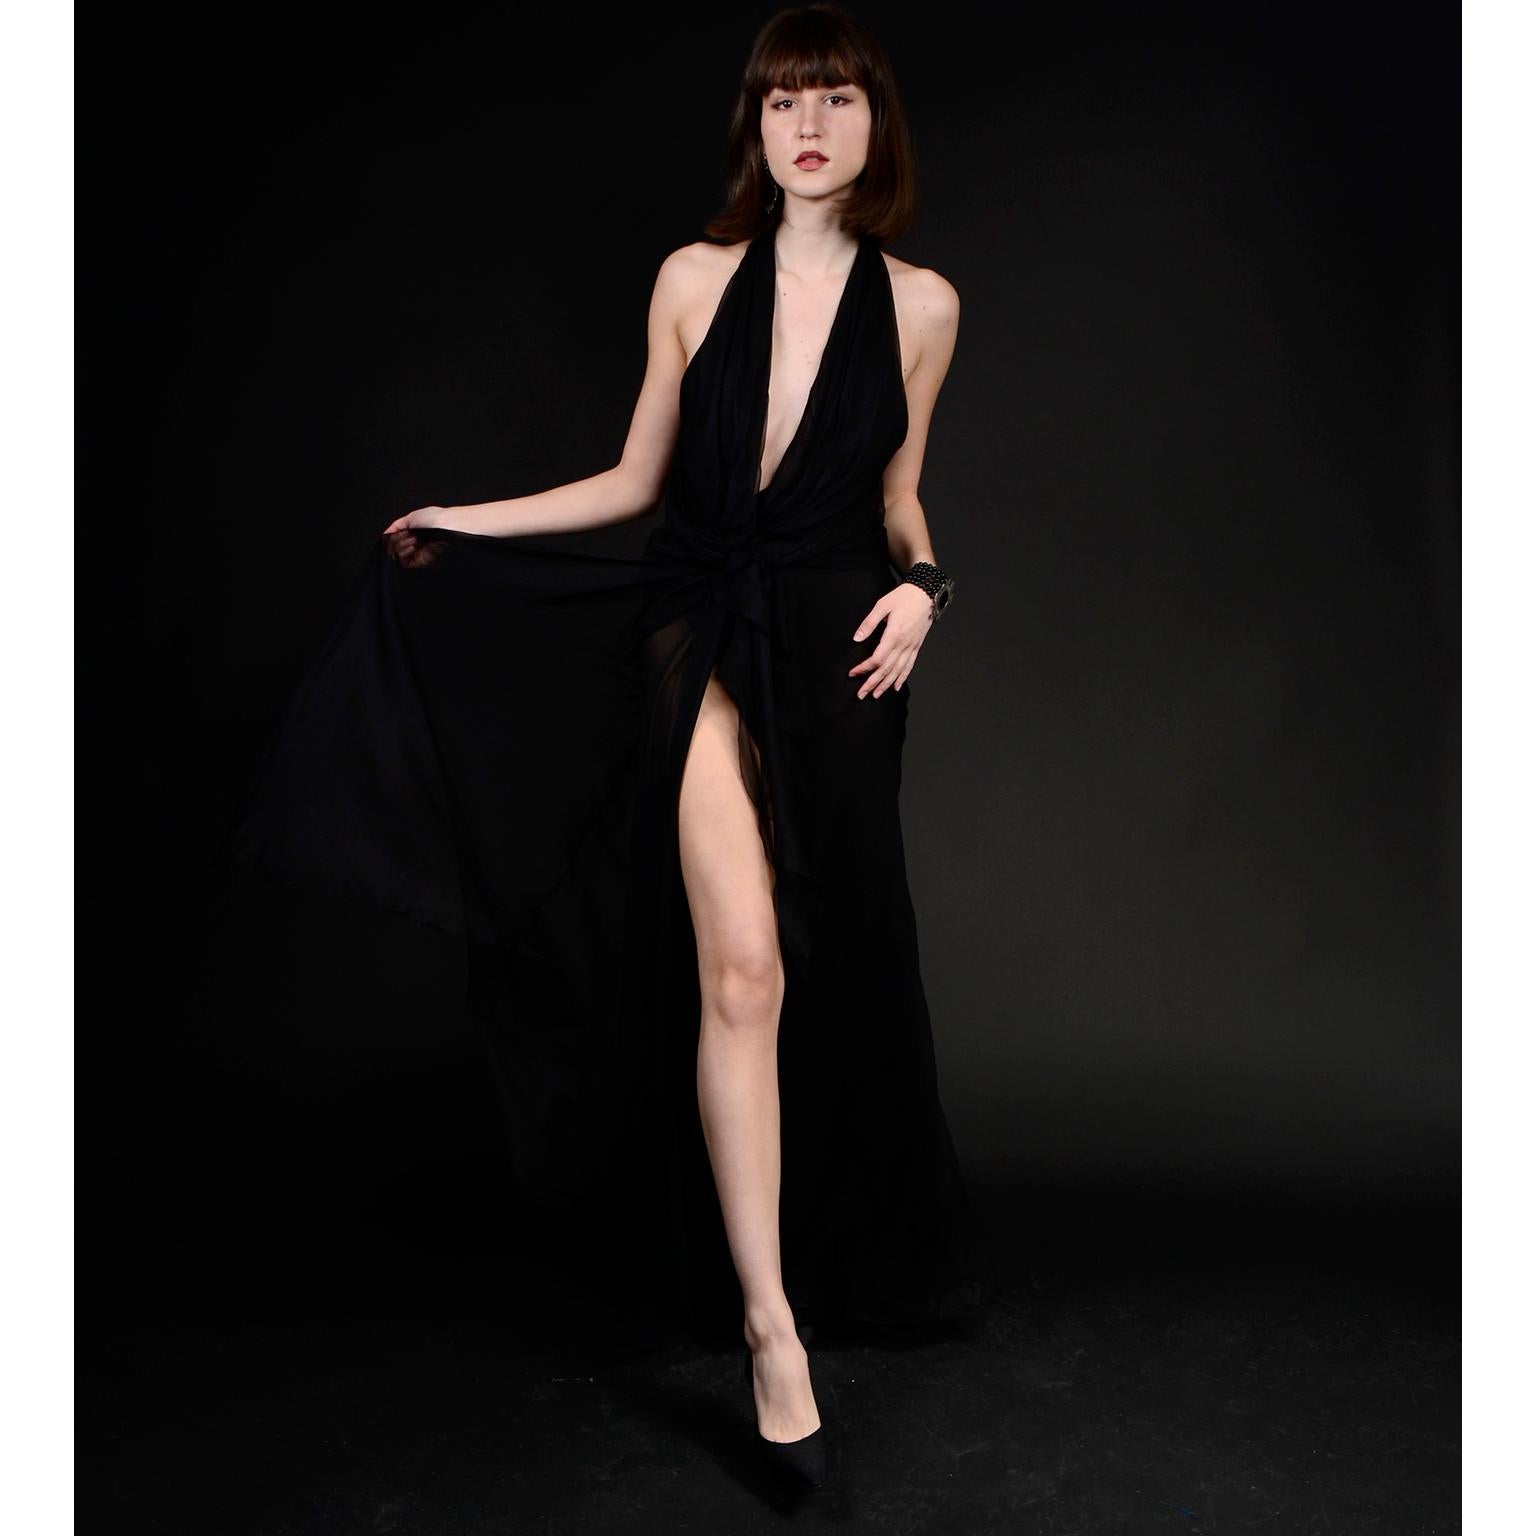 This is an absolutely stunning vintage Gianni Versace Couture evening dress. This vintage black silk chiffon dress has a thigh high cut slit in the front that reveals a leg, and a deep plunging neckline. We especially love the gorgeous sheer panel